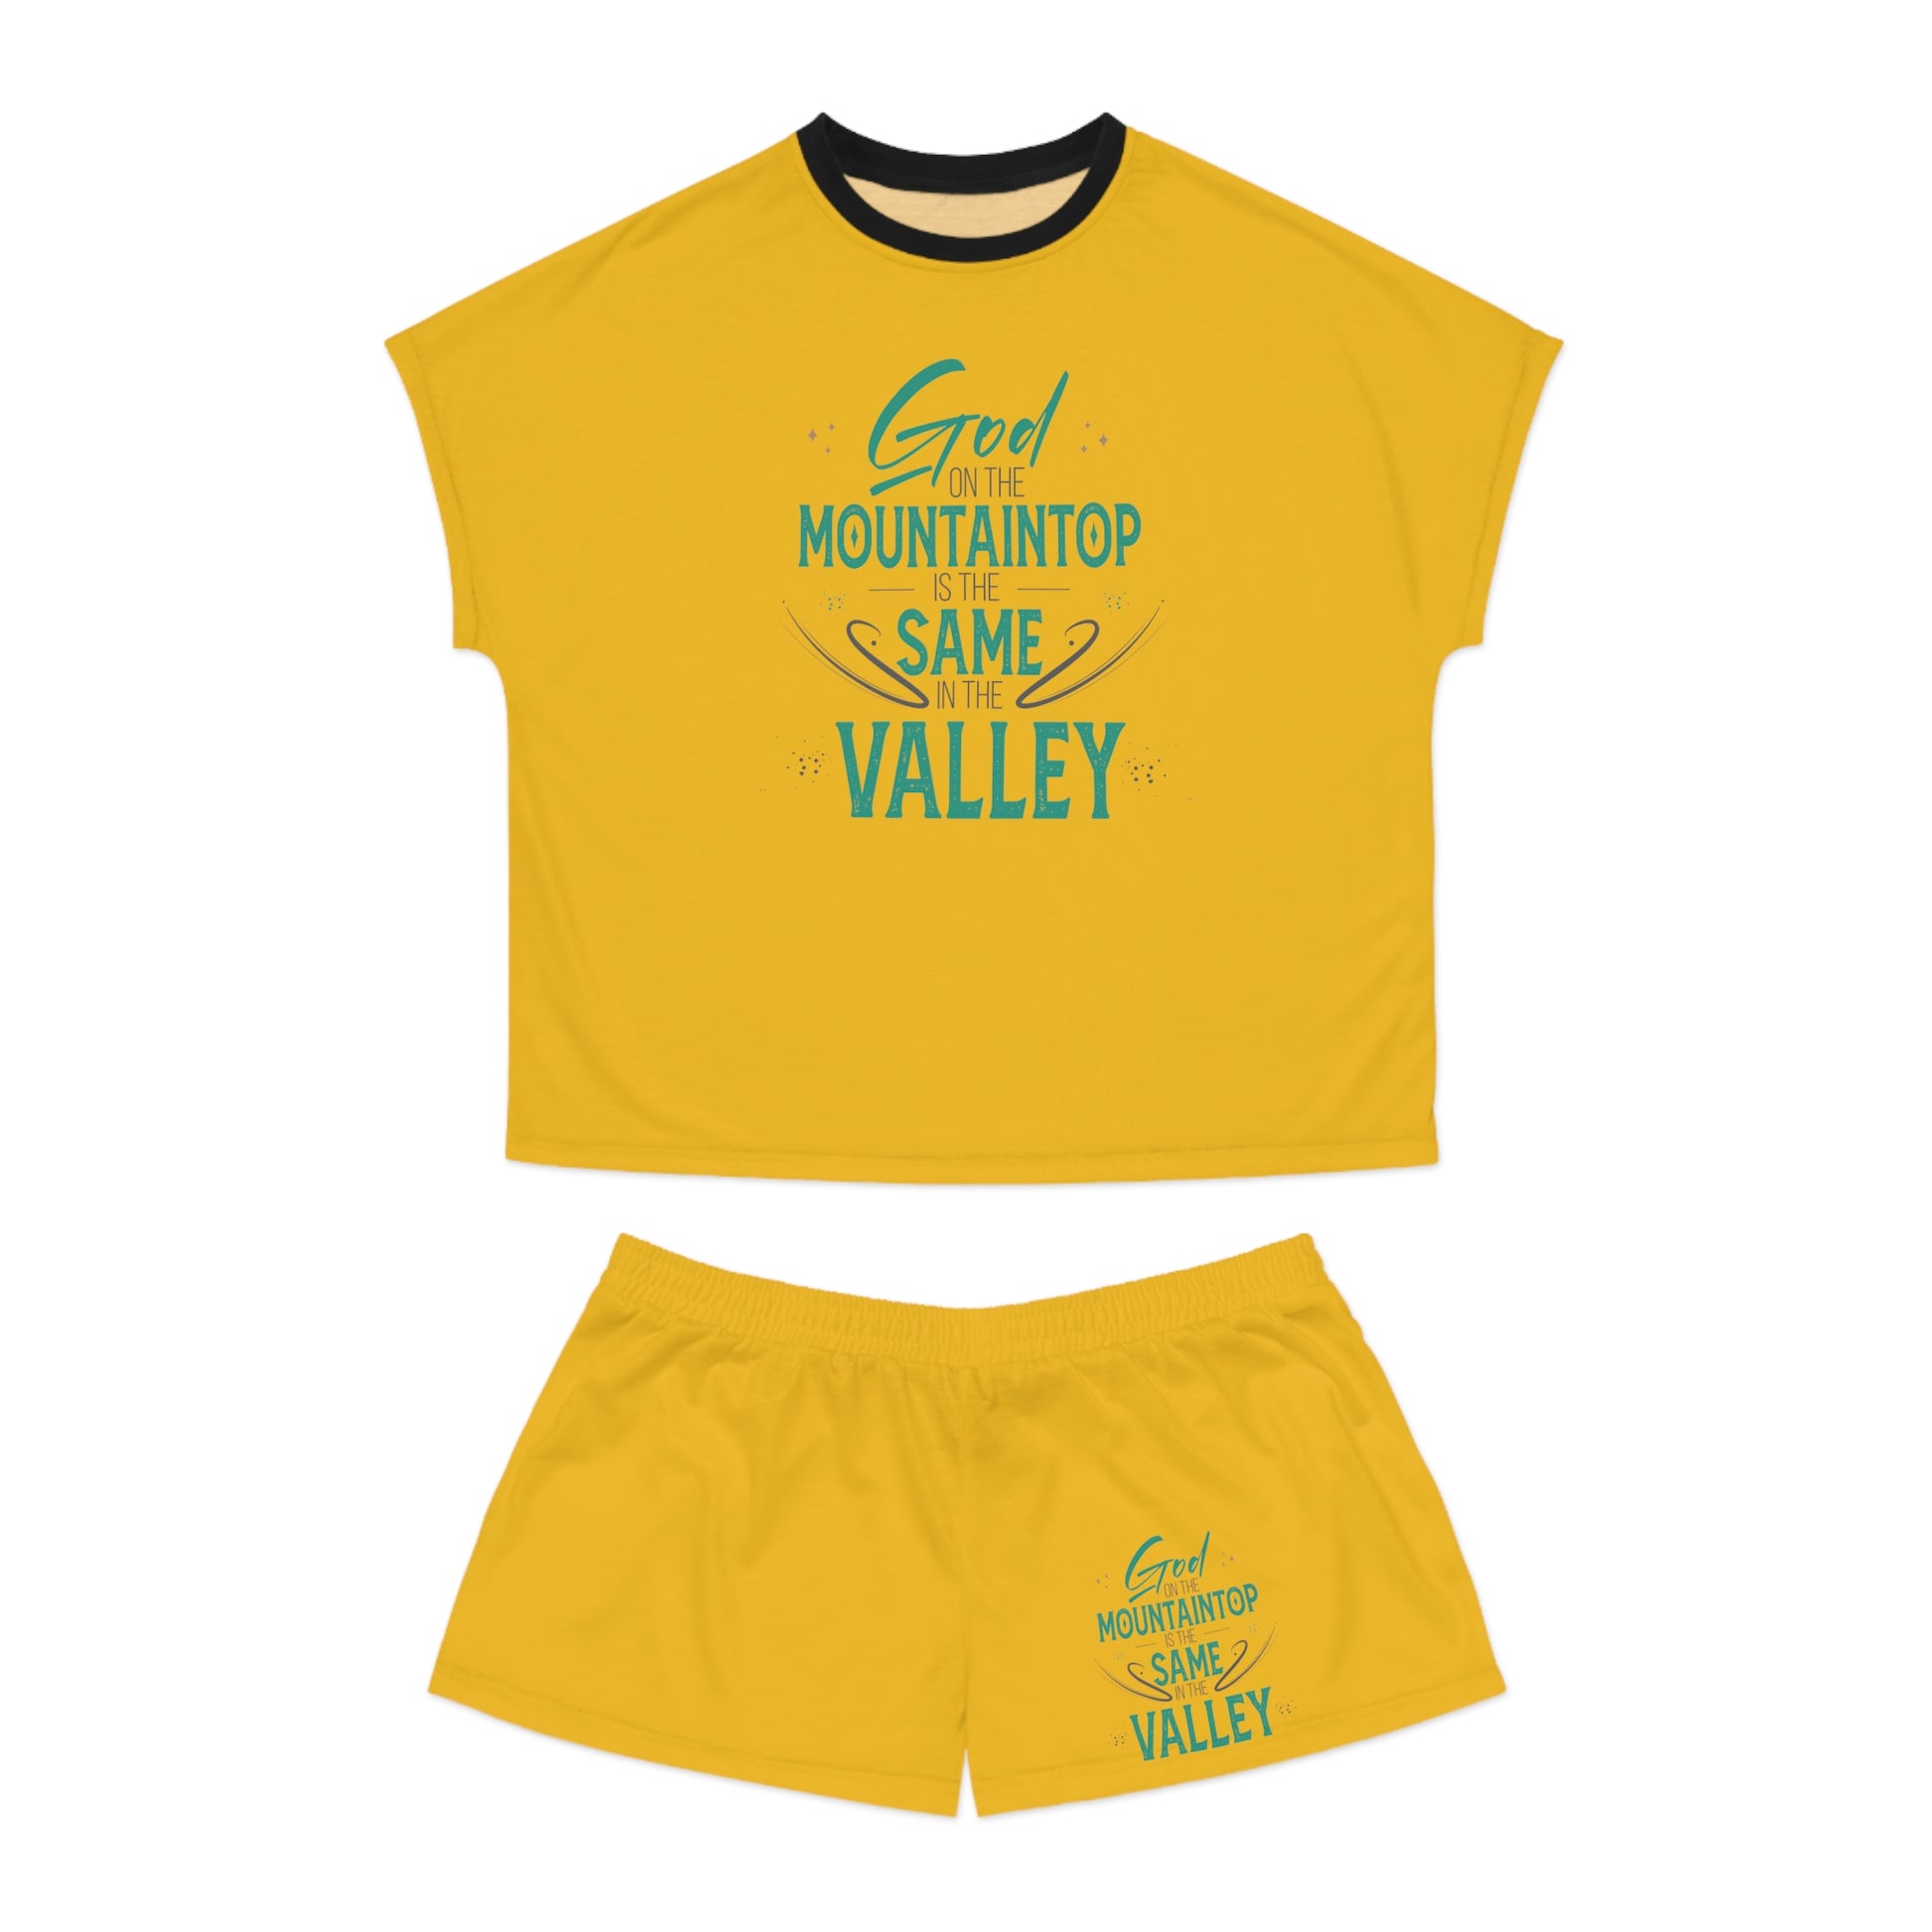 God On The Mountaintop Is The Same In The Valley Women's Christian Short Pajama Set Printify